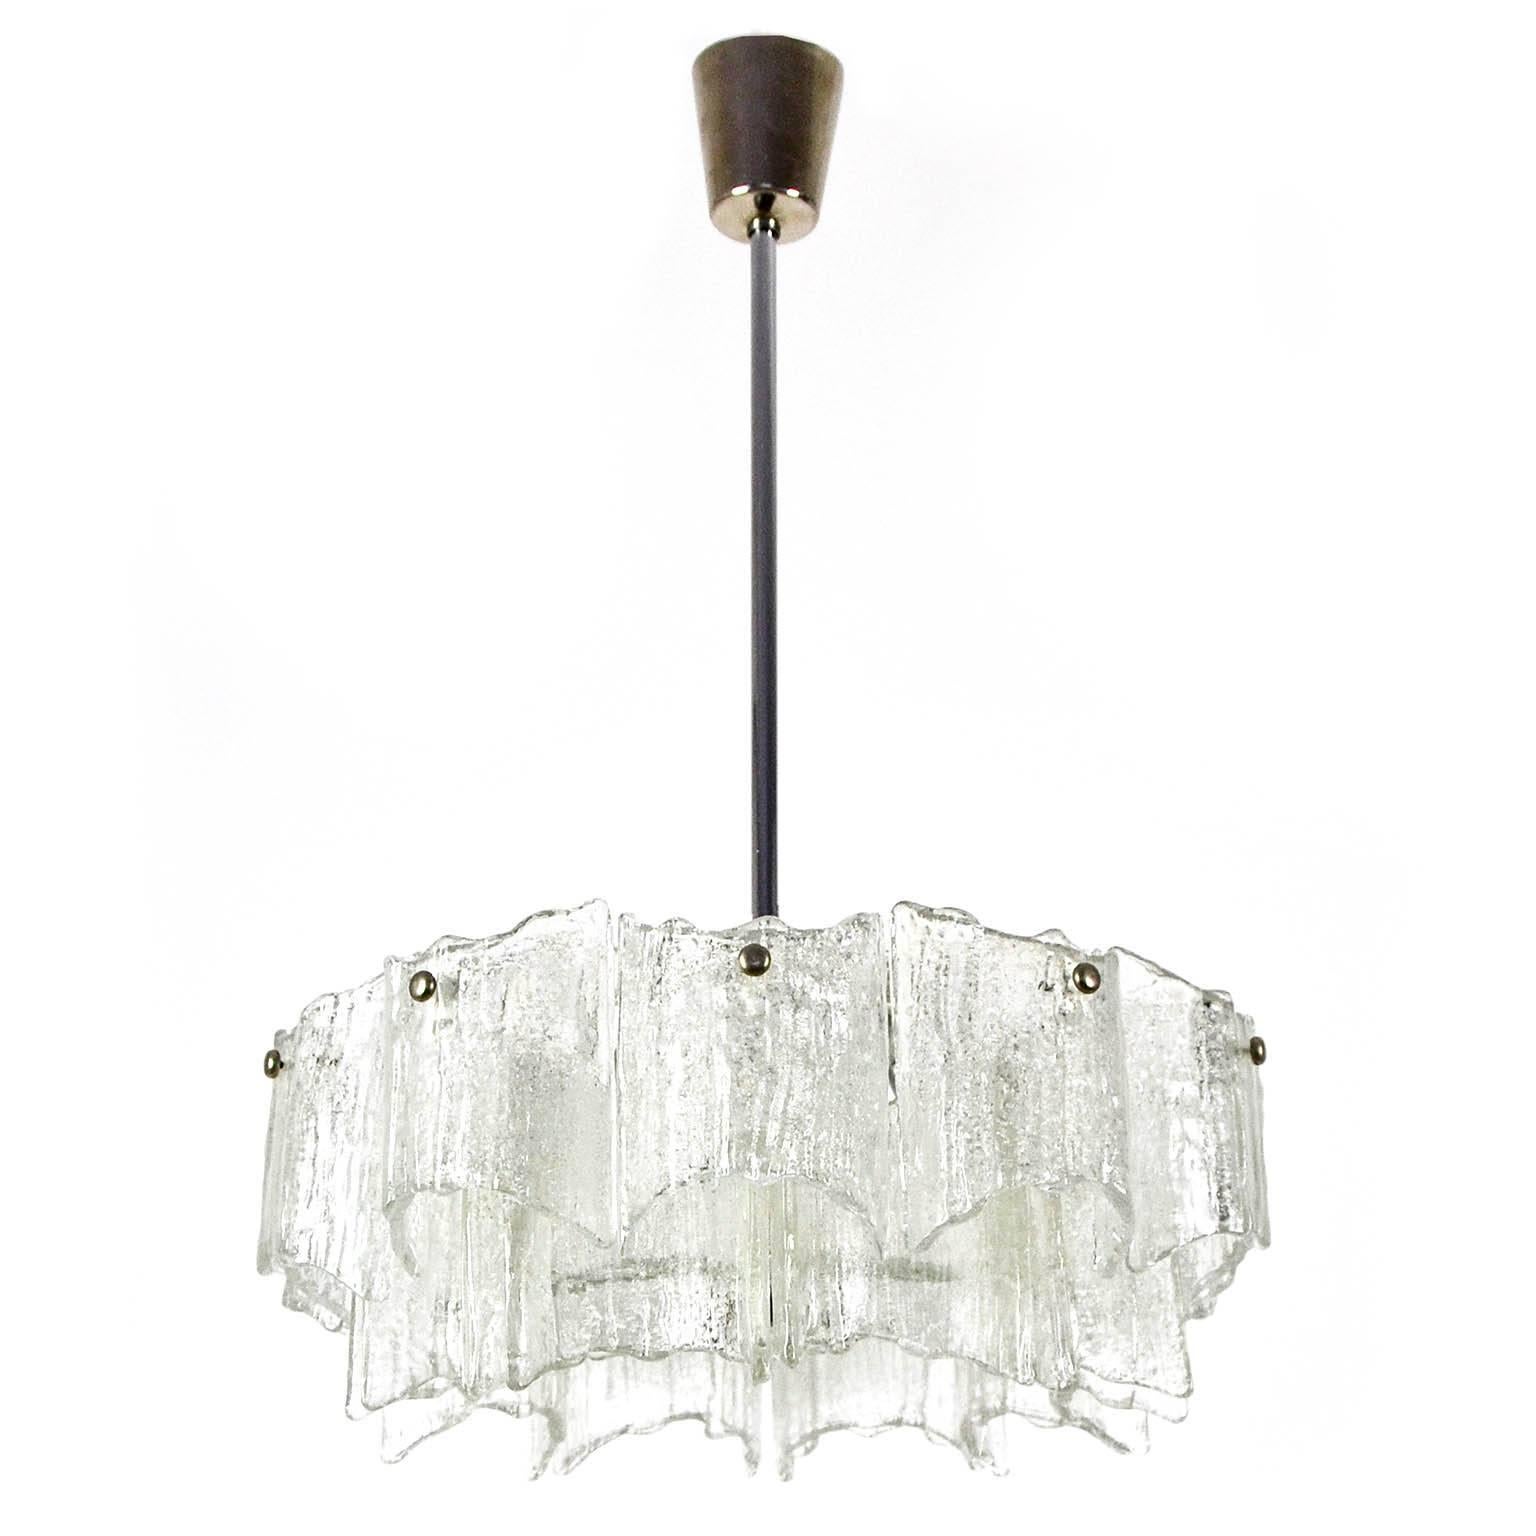 One of three beautiful star-shaped light fixtures by Kalmar, Vienna, Austria manufactured in Mid-Century, in 1960s. 
They are made of frosted ice glass and white enameled metal frames with nickeled rods and screws.
The rods can be altered to any